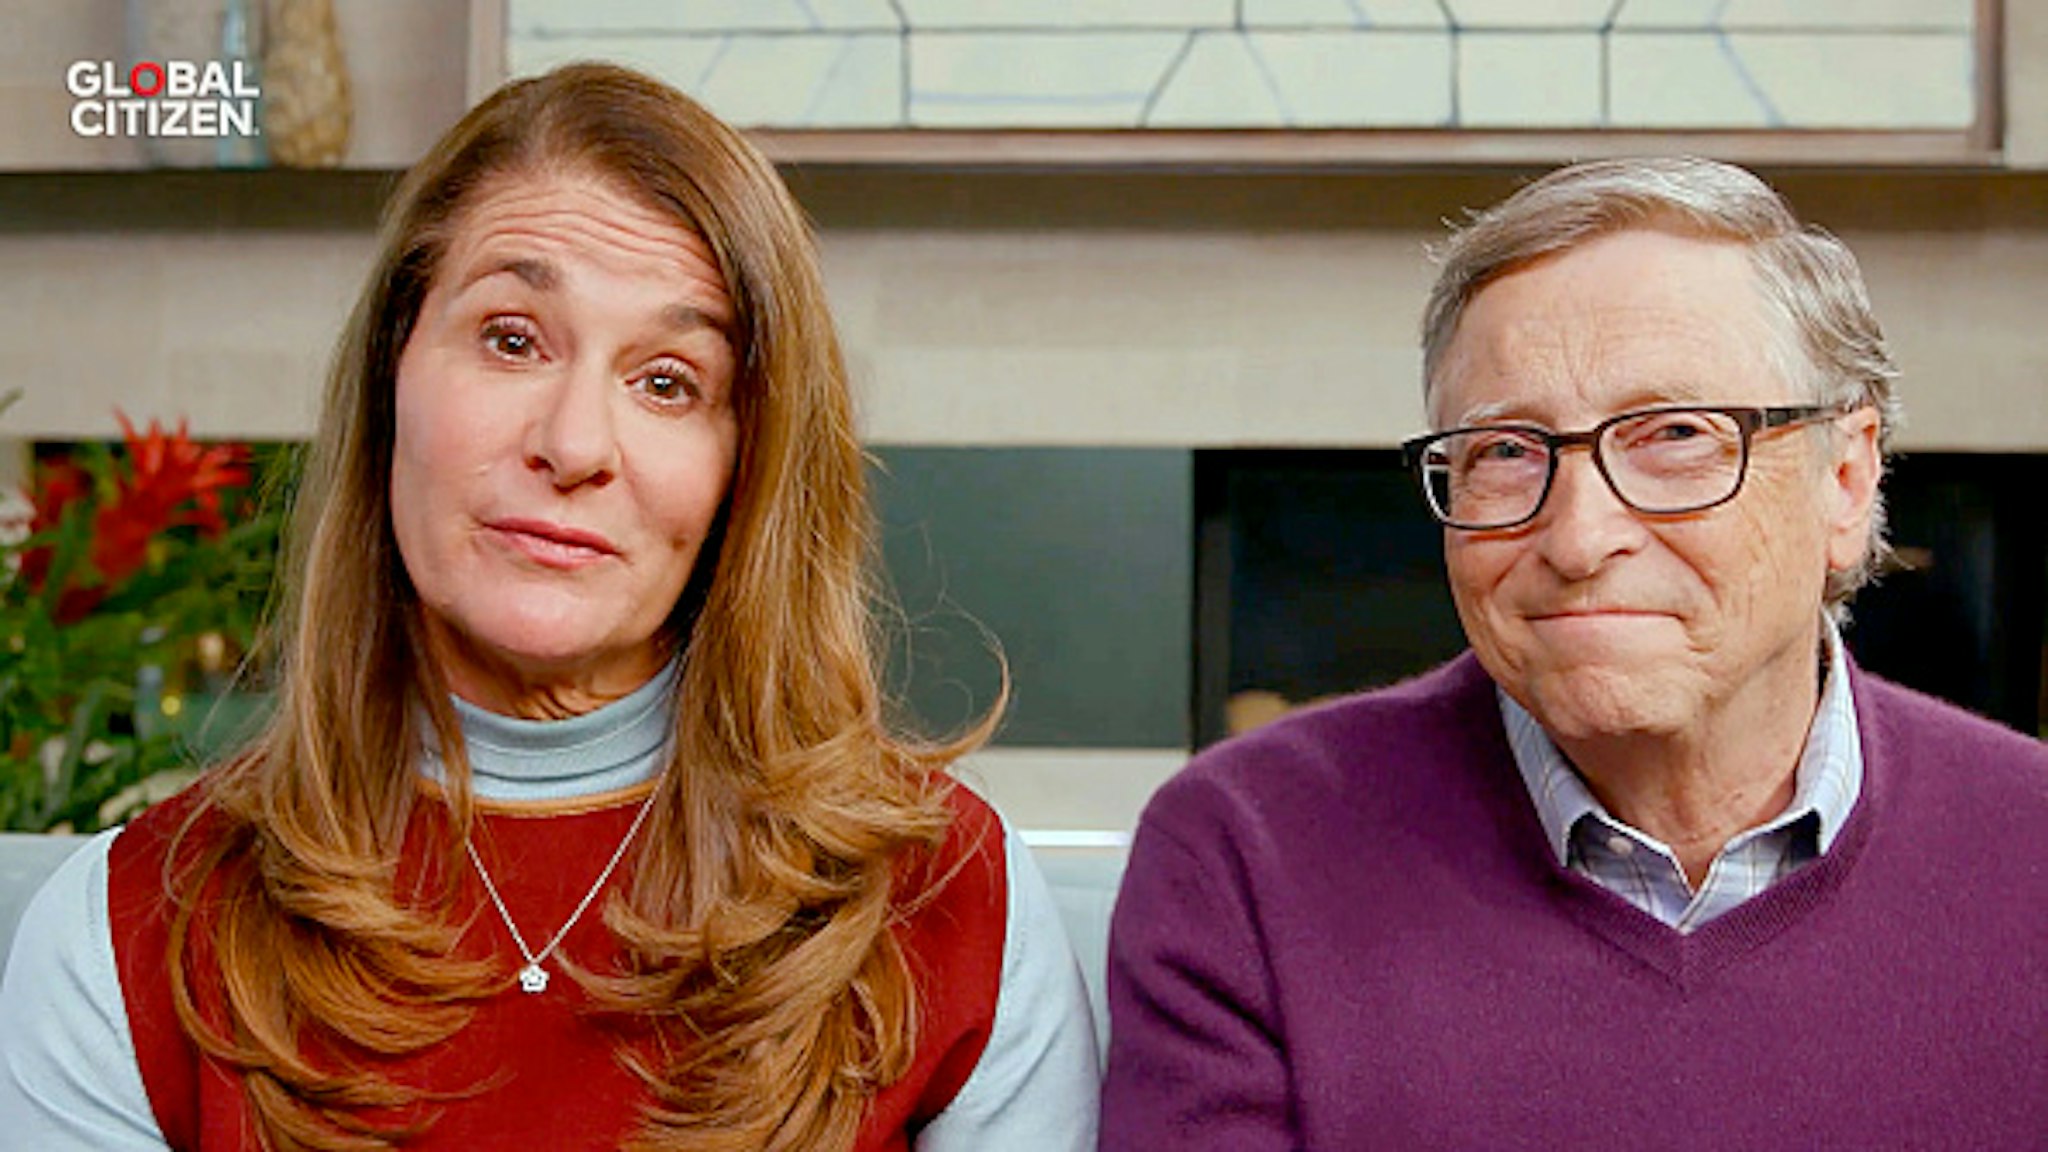 UNSPECIFIED LOCATION - APRIL 18: In this screengrab, (L-R) Melinda Gates and Bill Gates speak during "One World: Together At Home" presented by Global Citizen on April, 18, 2020. The global broadcast and digital special was held to support frontline healthcare workers and the COVID-19 Solidarity Response Fund for the World Health Organization, powered by the UN Foundation.